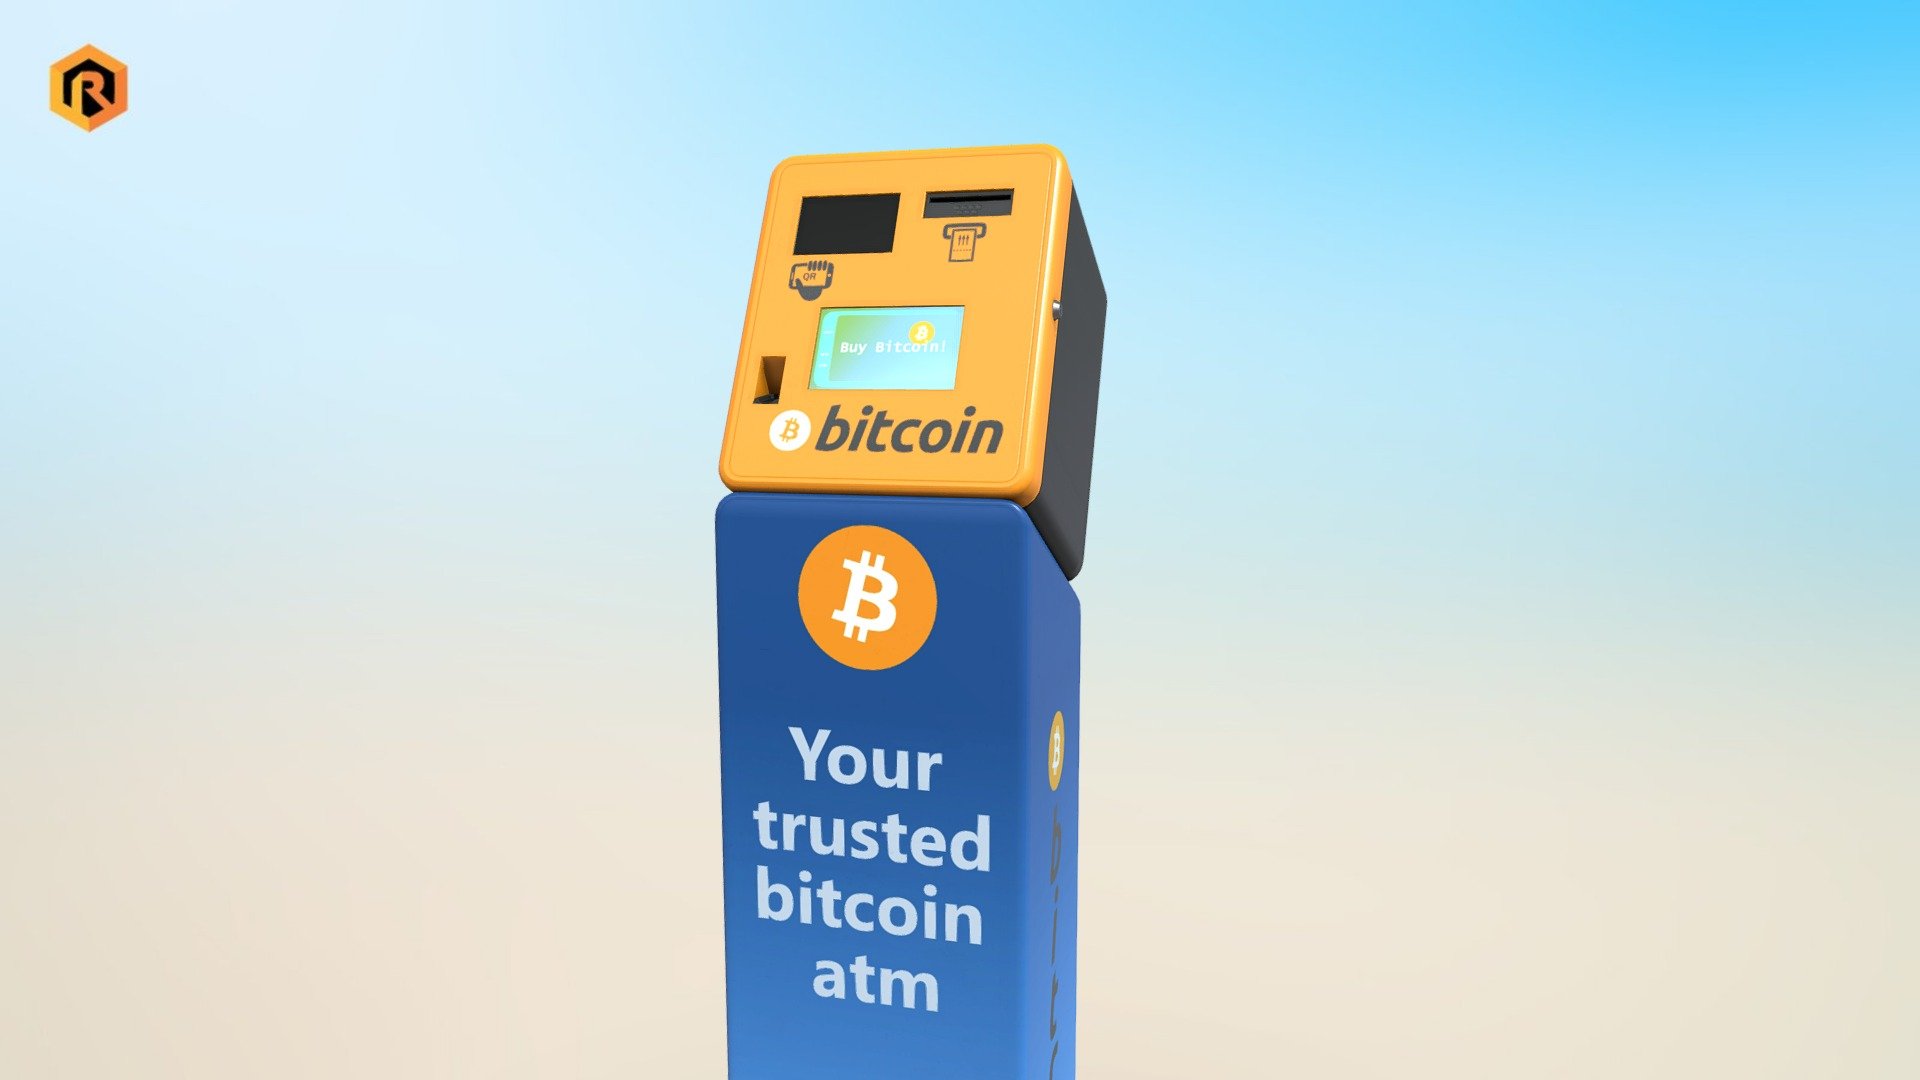 Low-Poly PBR 3D model of Bitcoin ATM Machine.

Bitcoin ATMs are kiosks that allow to purchase Bitcoin and other cryptocurrencies by using cash or debit card.  

You can download PRO version (with sources) here: https://skfb.ly/oyU6Z

**Technical details: **  




3 PBR textures sets. (Main Body, Emission and Glass)   

1262 Triangles

1038  Vertices  

Model is one mesh.  

Lot of additional file formats included (Blender, Unity, UE4, Maya etc.)  

PBR texture sets details:   




4096 Main texture set (Albedo, Metallic, Smoothness, Normal, AO)   

1024 Emission texture set (Albedo, Metallic, Smoothness, Normal, AO)   

512  Glass texture set (Albedo, Metallic, Smoothness, Normal) 

More file formats are available in additional zip file on product page.

Please feel free to contact me if you have any questions or need any support for this asset.

Support e-mail: support@rescue3d.com - Bitcoin ATM - Download Free 3D model by Rescue3D Assets (@rescue3d) 3d model